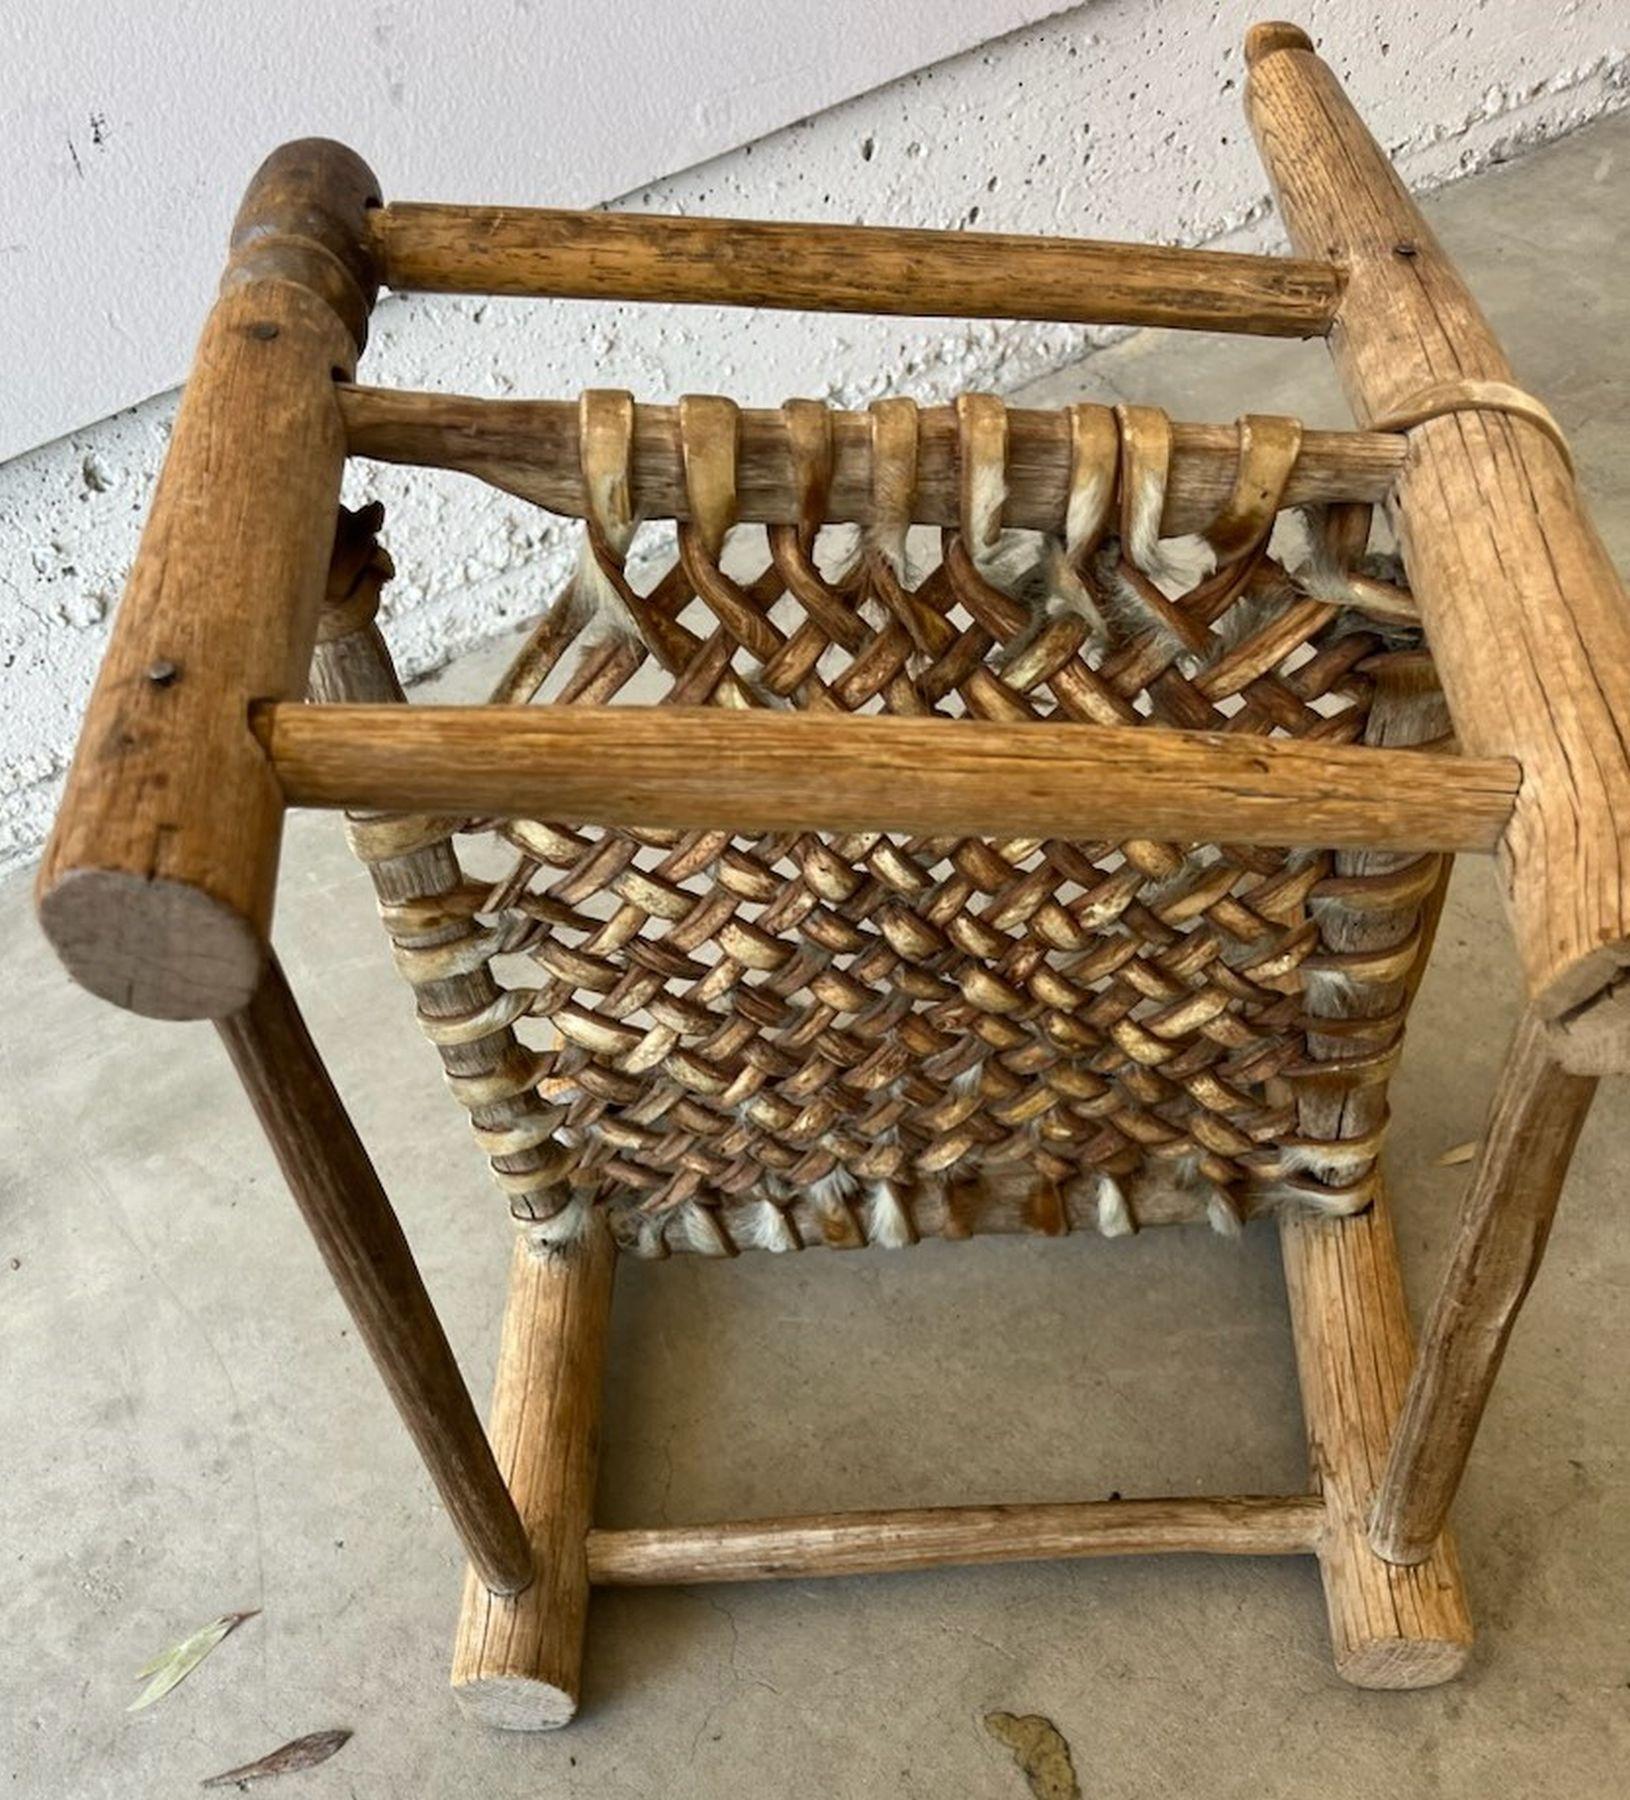 This amazing early Pueblo hand made child's chair has a rawhide hand woven seat ( deer hide ). The condition is very good with a missing top slat from the ladder back top of the chair.